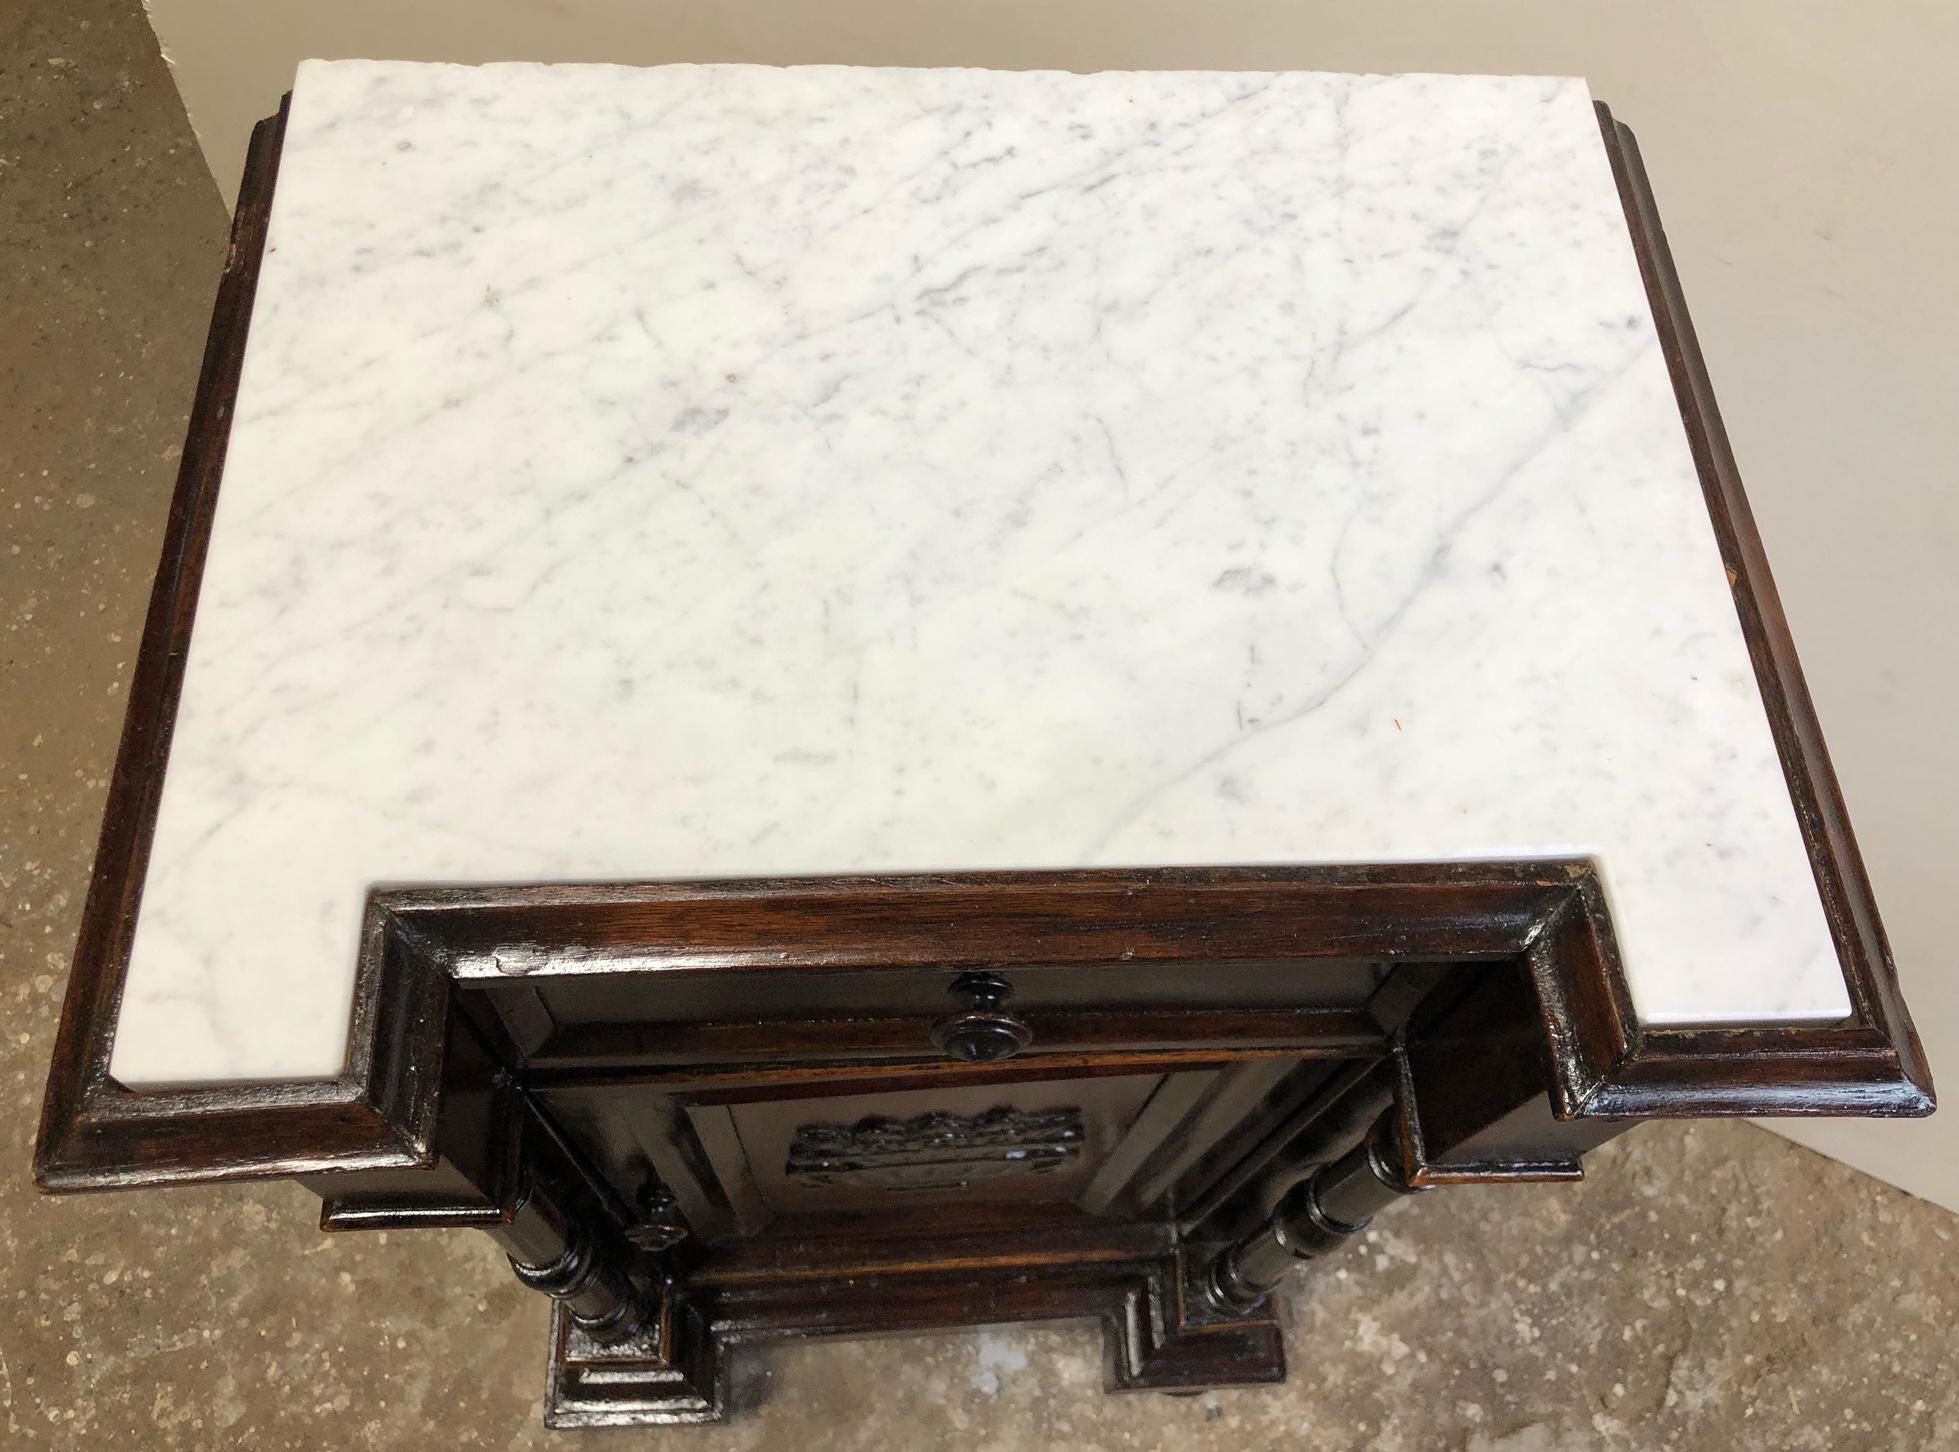 Italian nightstands from 1880, original color. 
The top is original in hand-cut Carrara marble
The drawer is built in the corners with handmade dovetail joints
The opening direction of the door is right
It will be delivered in a specific wooden